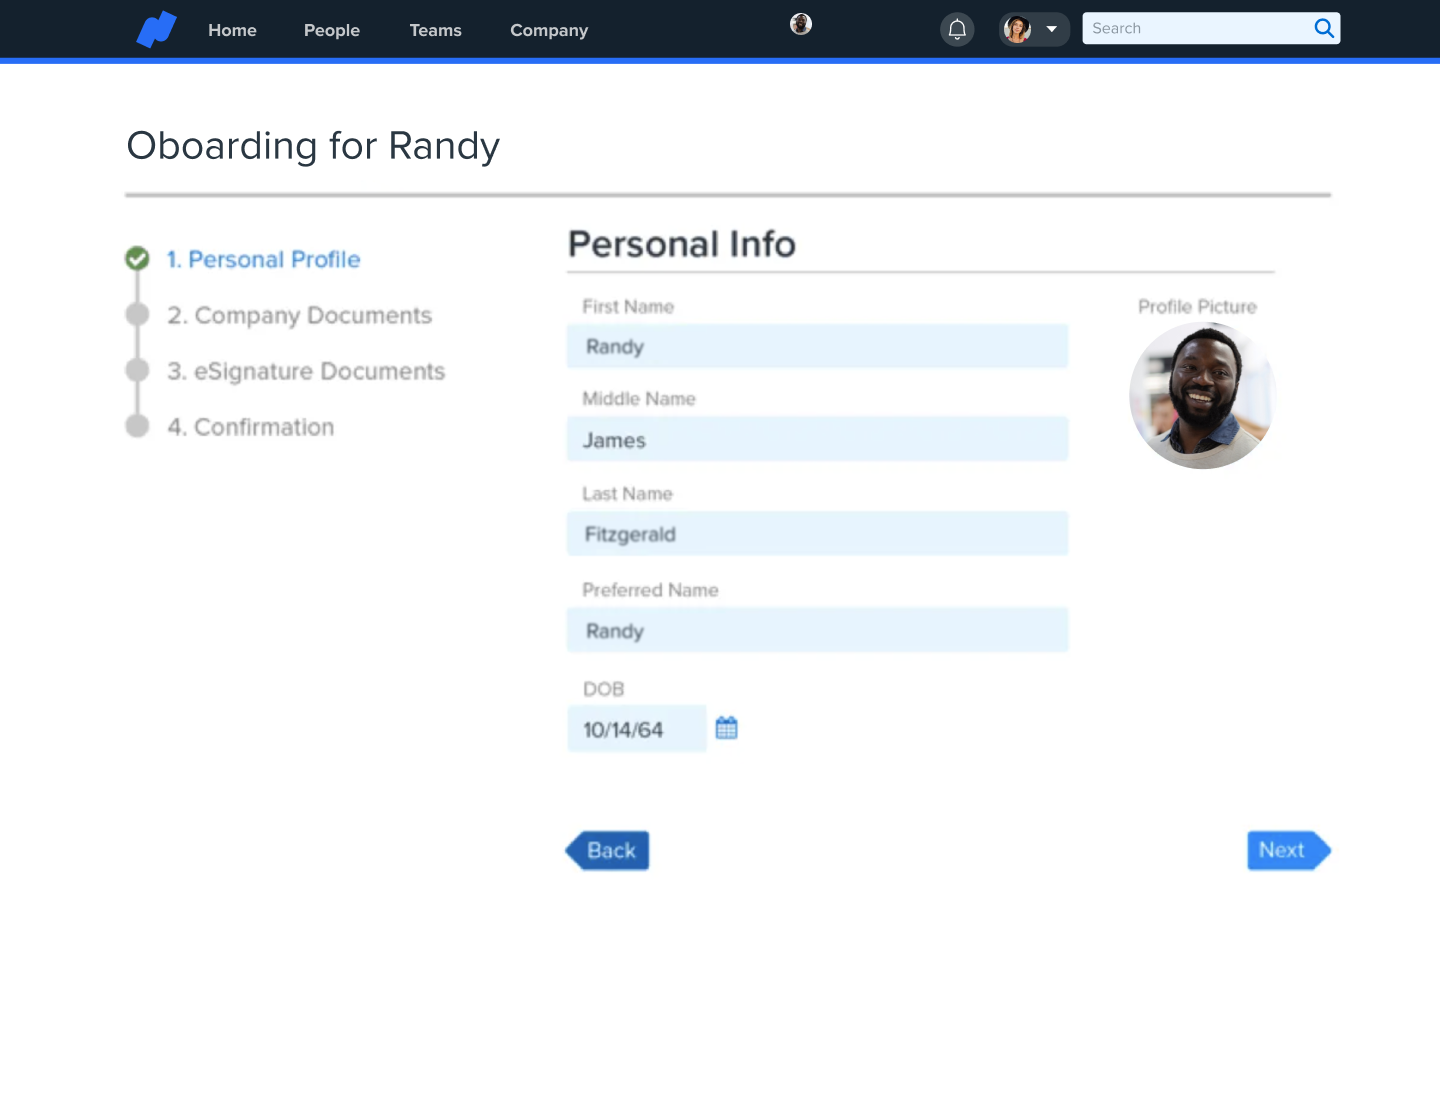 Namely Software - Employee Onboarding: save time and engage new hires before they ever walk in the door with customizable employee onboarding workflows complete with eSignature functionality